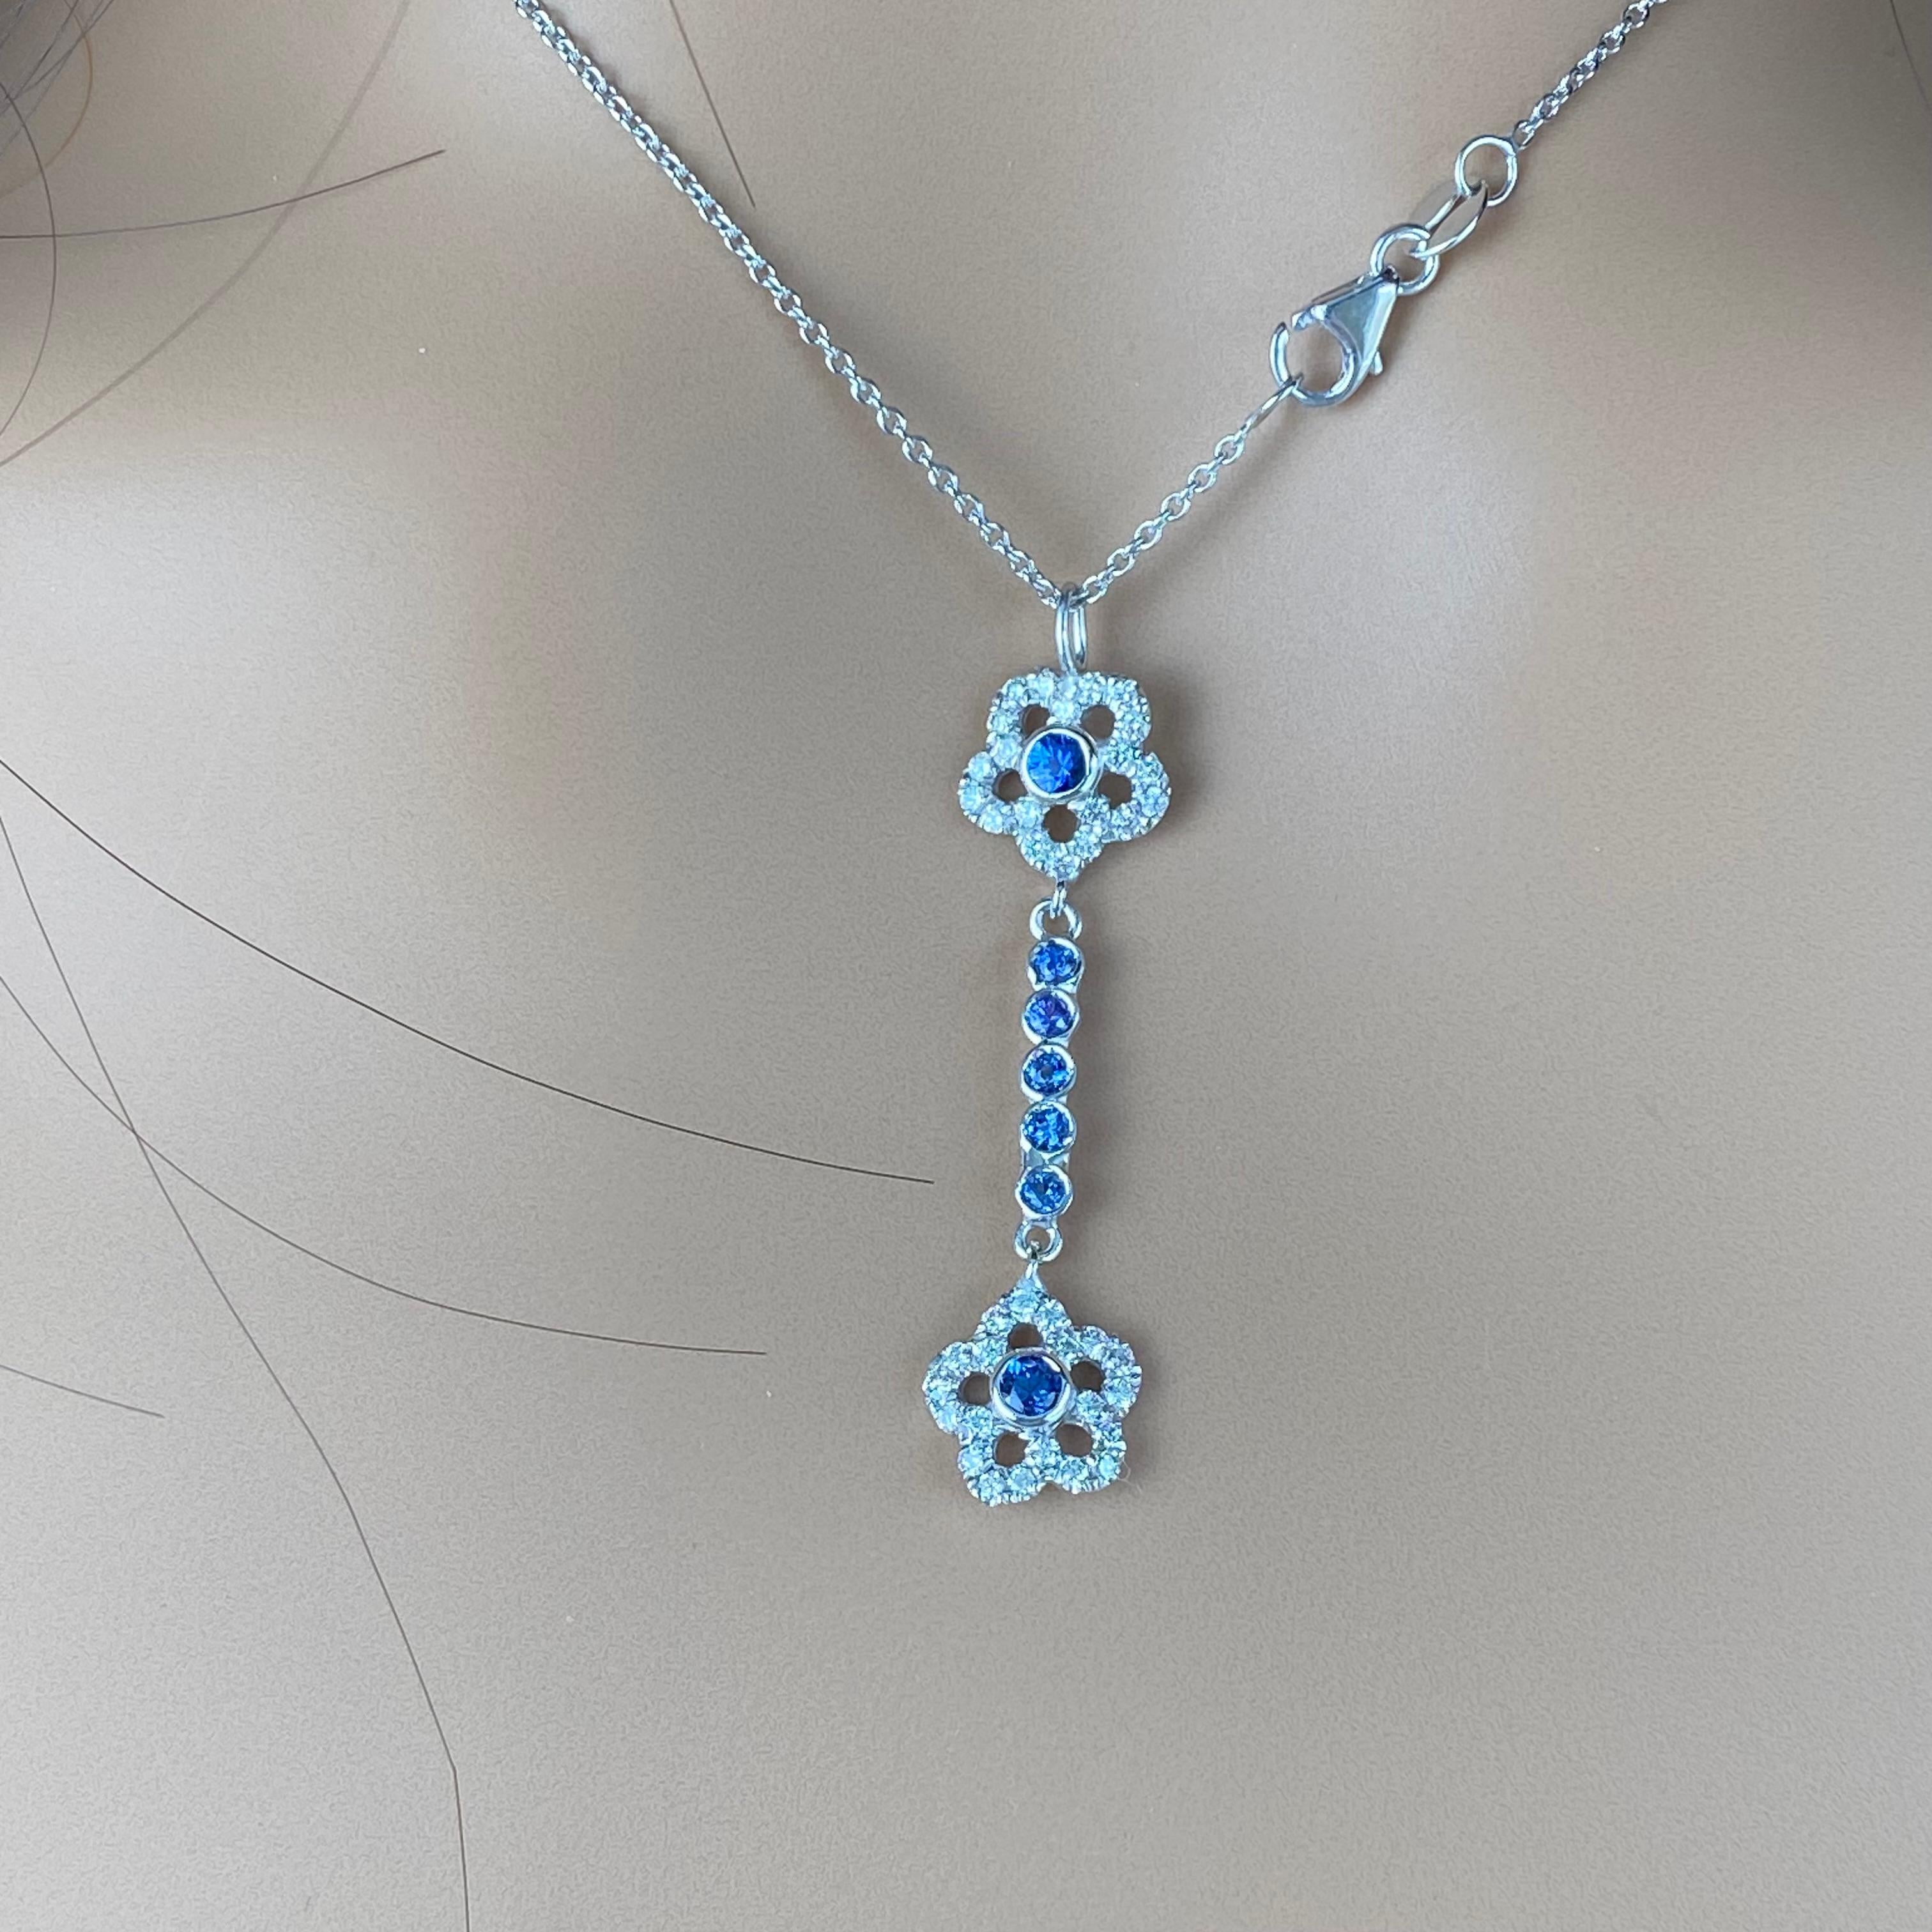 Introducing our exquisite 14 karat white gold lariat drop necklace, an epitome of elegance and sophistication. Crafted with meticulous attention to detail, this stunning piece features a captivating floral design embellished with lustrous sapphires